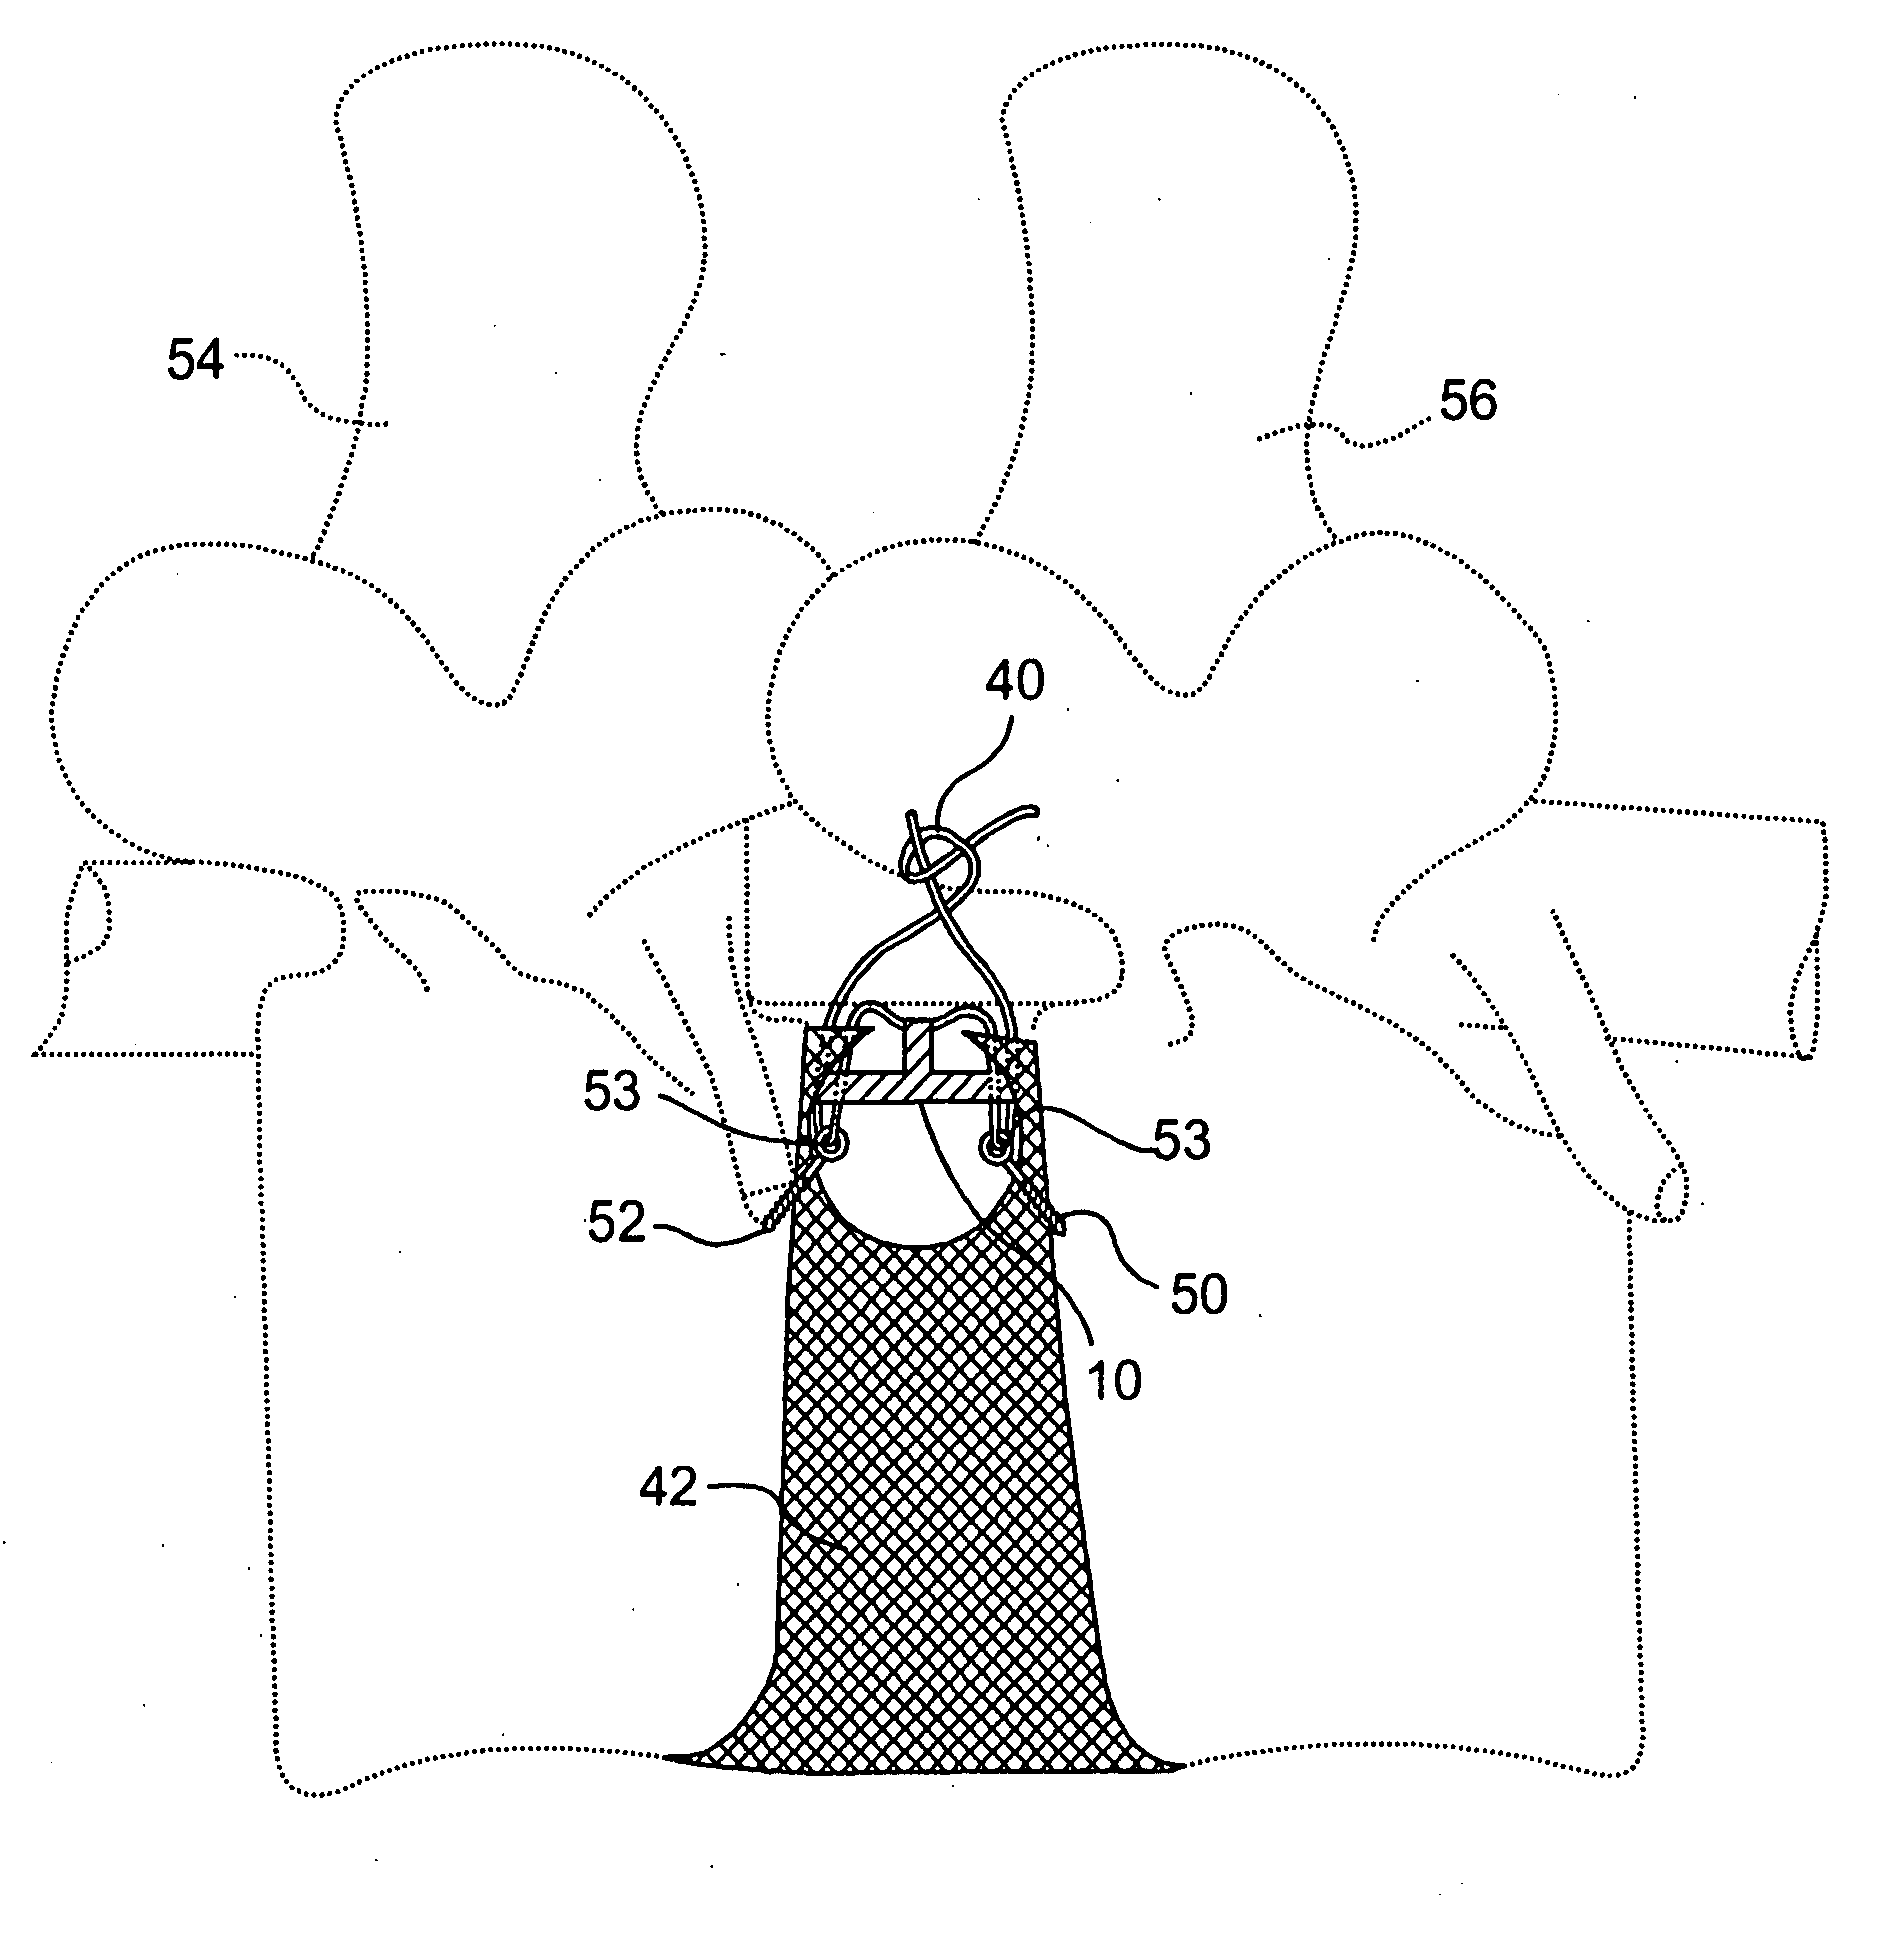 Spinal disc annulus repair device